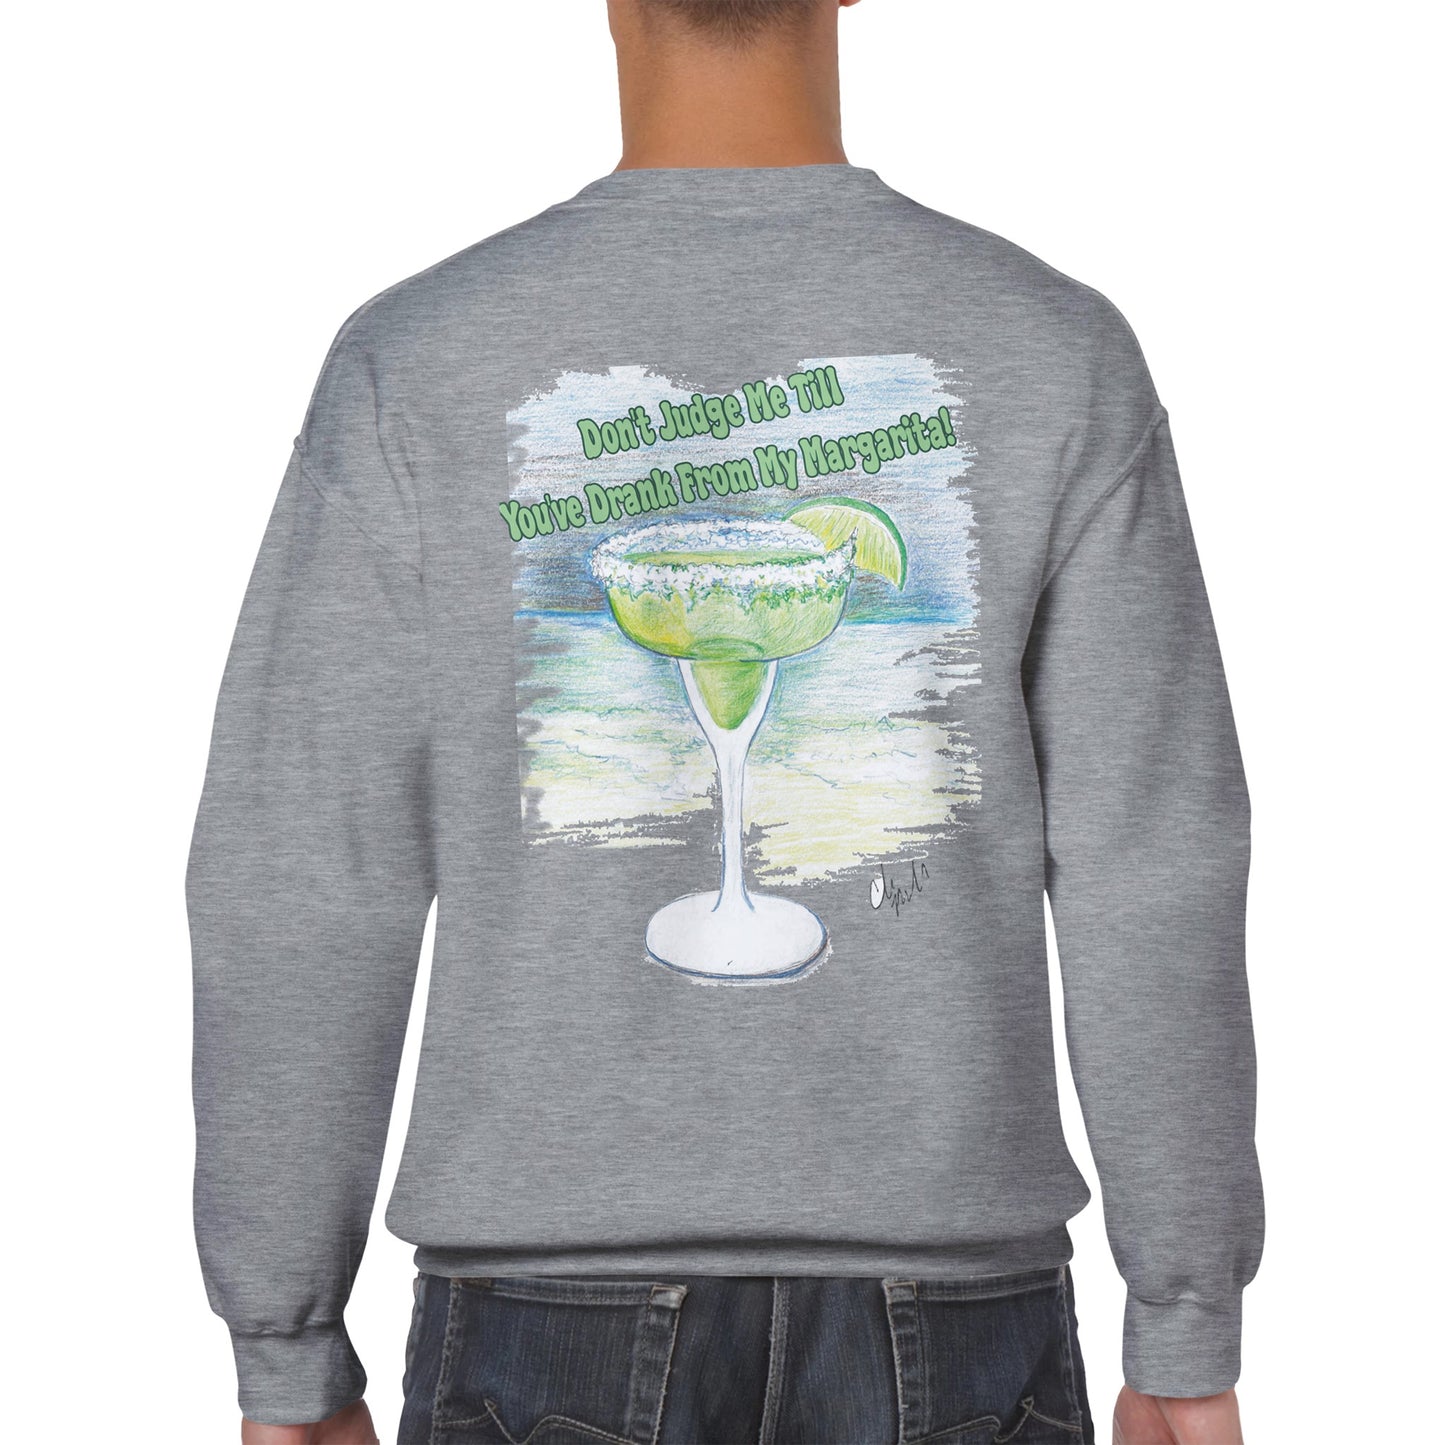 A ash Classic Unisex Crewneck sweatshirt with original artwork and motto Don’t Judge Me Till You’ve Drank From My Margarita on back and Whatya Say logo on front from WhatYa Say Apparel a rear view of short haired male model.